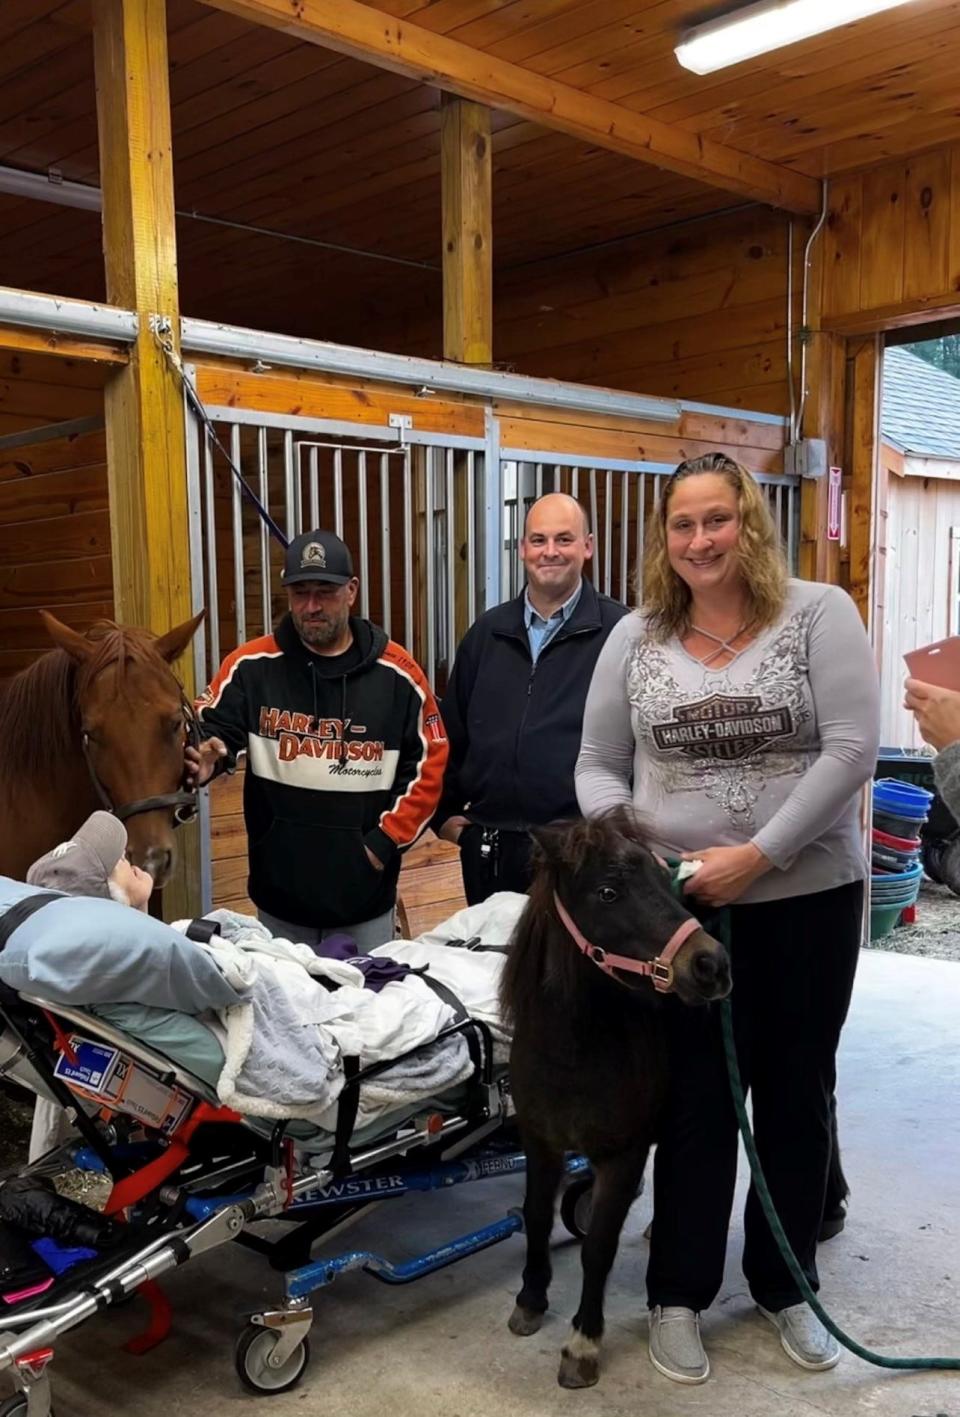 A family brought their elderly mother to visit Deep Pond Farm in Taunton to fulfill her last wish to see horses on Sept. 29, 2023. The moving moment was shared on social media by Brewster Ambulance. With her that day are, standing from left, Deep Pond owner Georges Ghazal; Brewster Ambulance Team Member Sean Lambrecht; and Georges Ghazal's wife Melissa Ghazal. The horses are Amari and Sable.